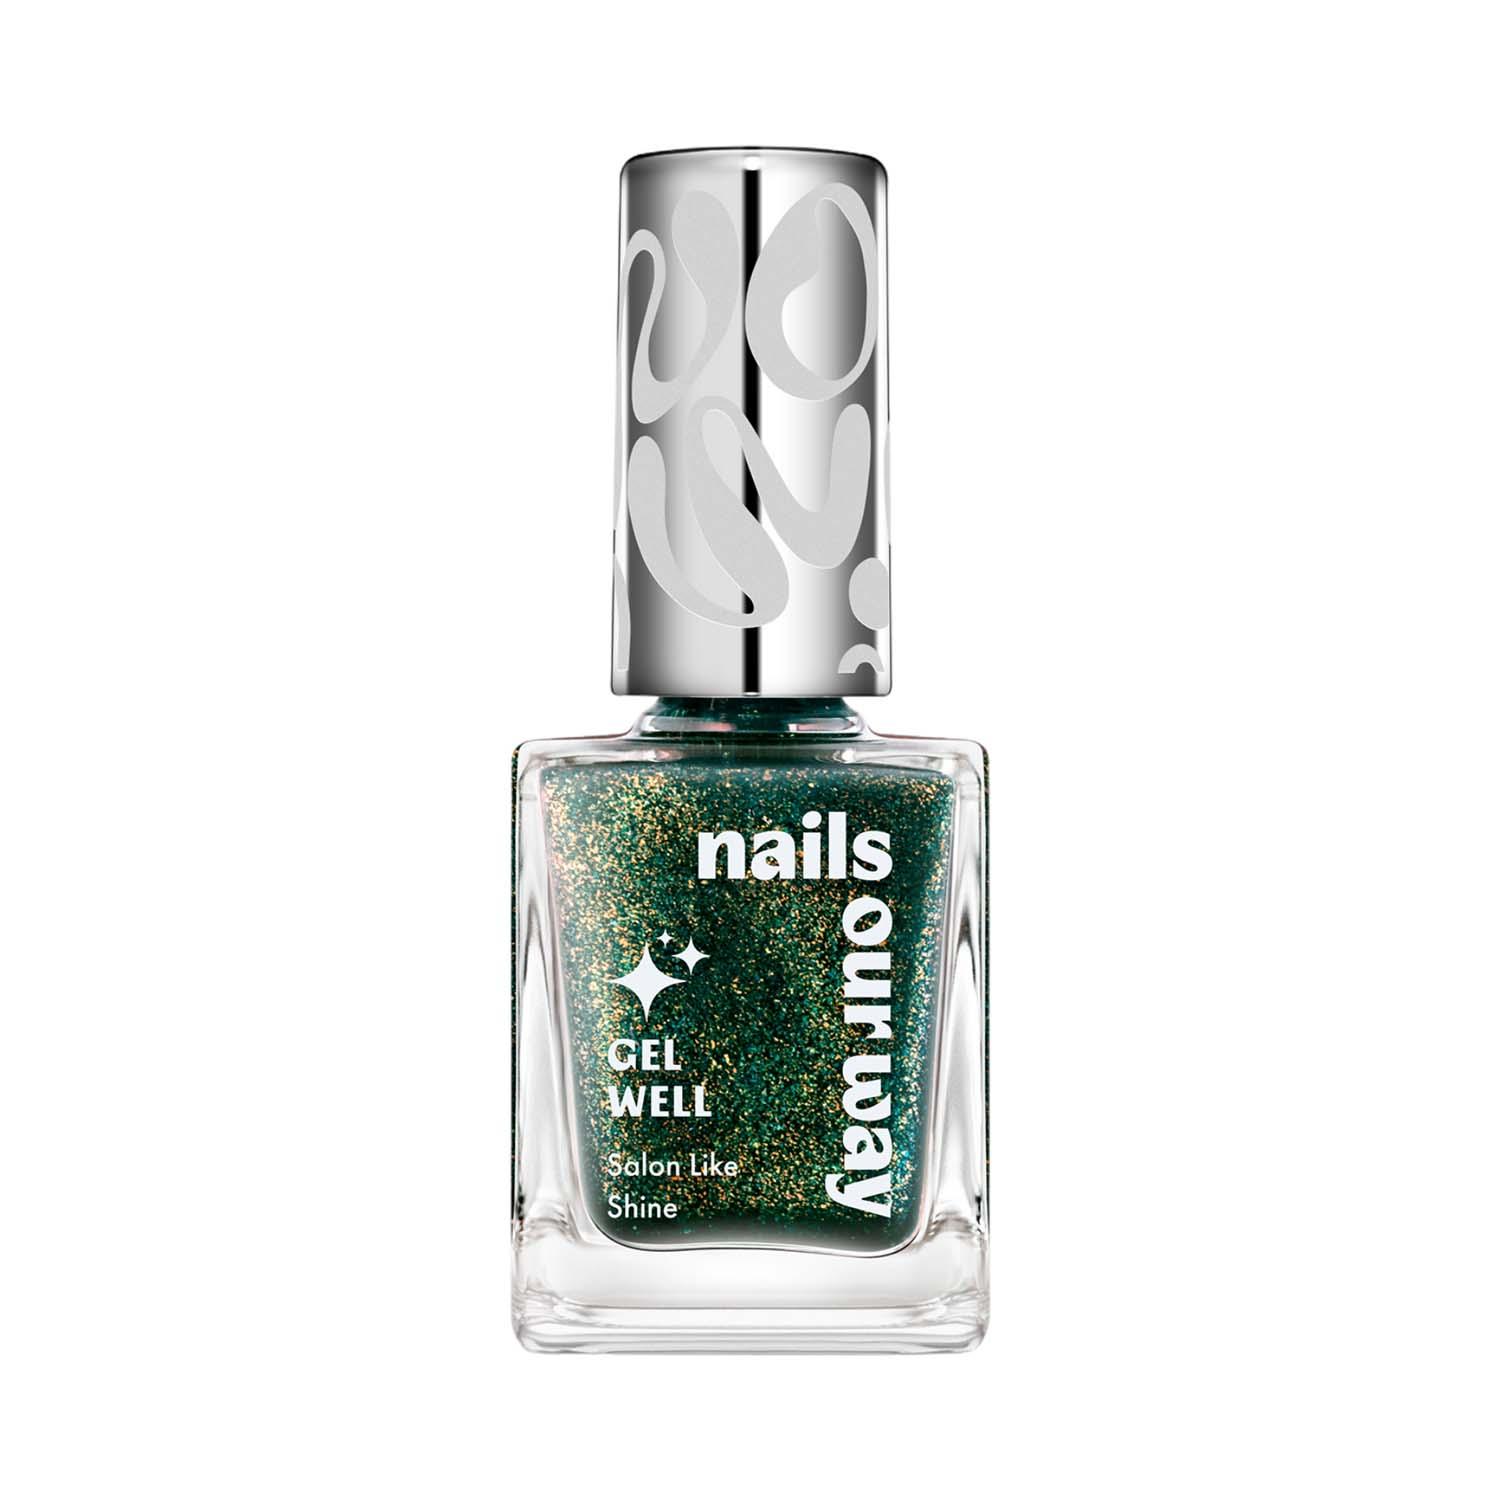 Nails Our Way | Nails Our Way Gel Well Nail Enamel - 406 Mischievious (10 ml)